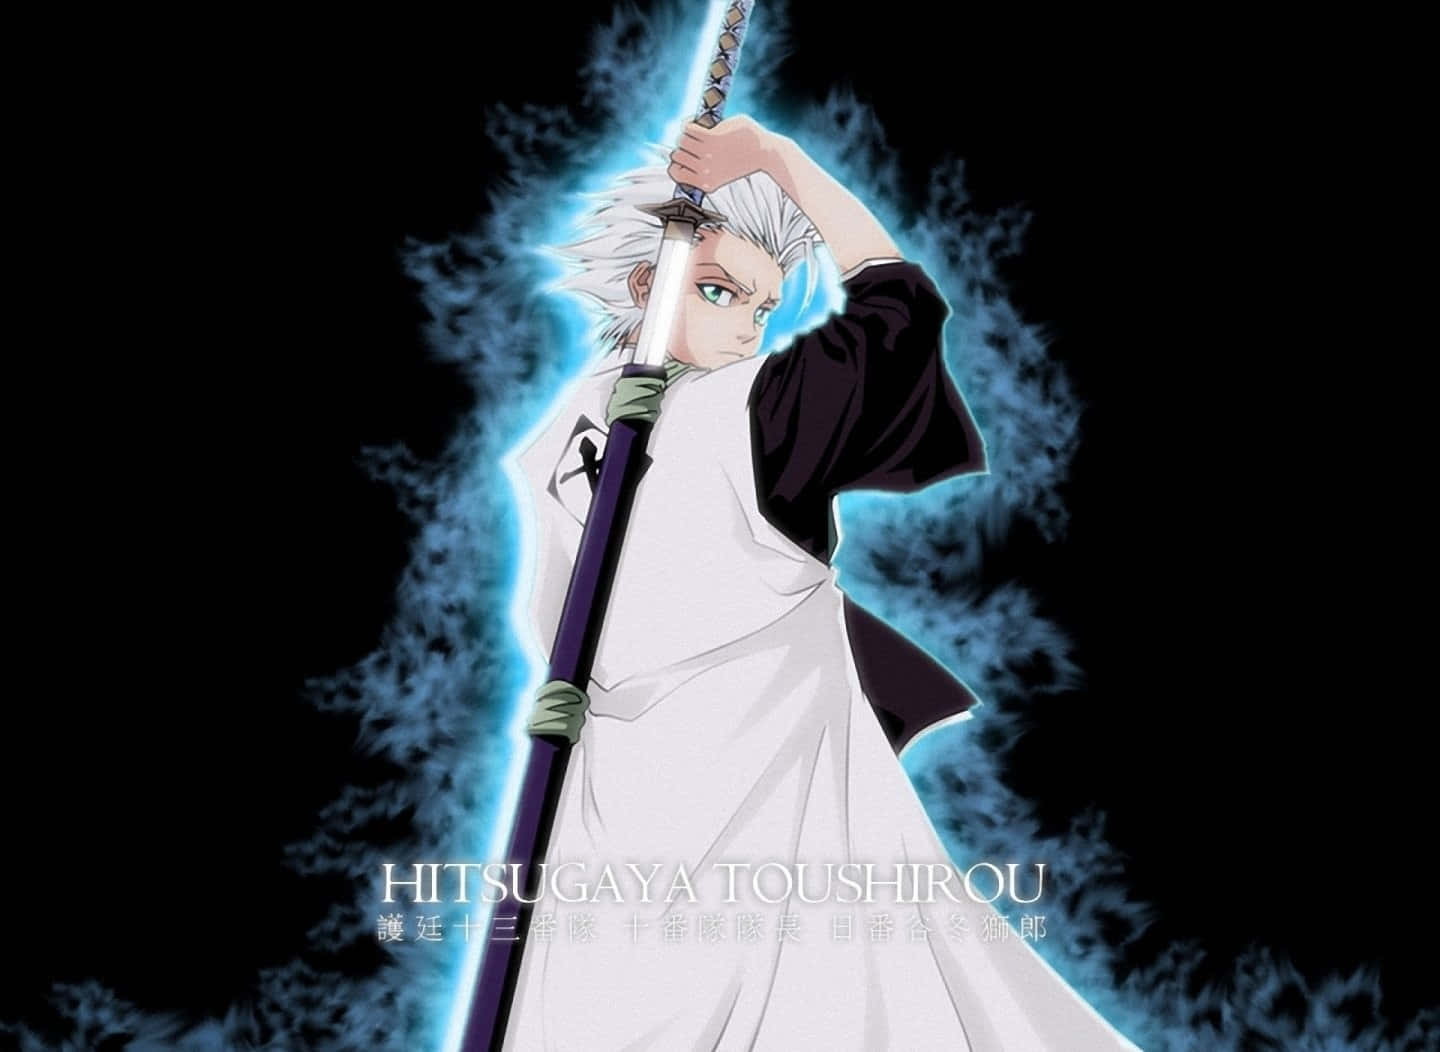 Toshiro Hitsugaya, The Youngest Captain In The Gotei 13. Wallpaper